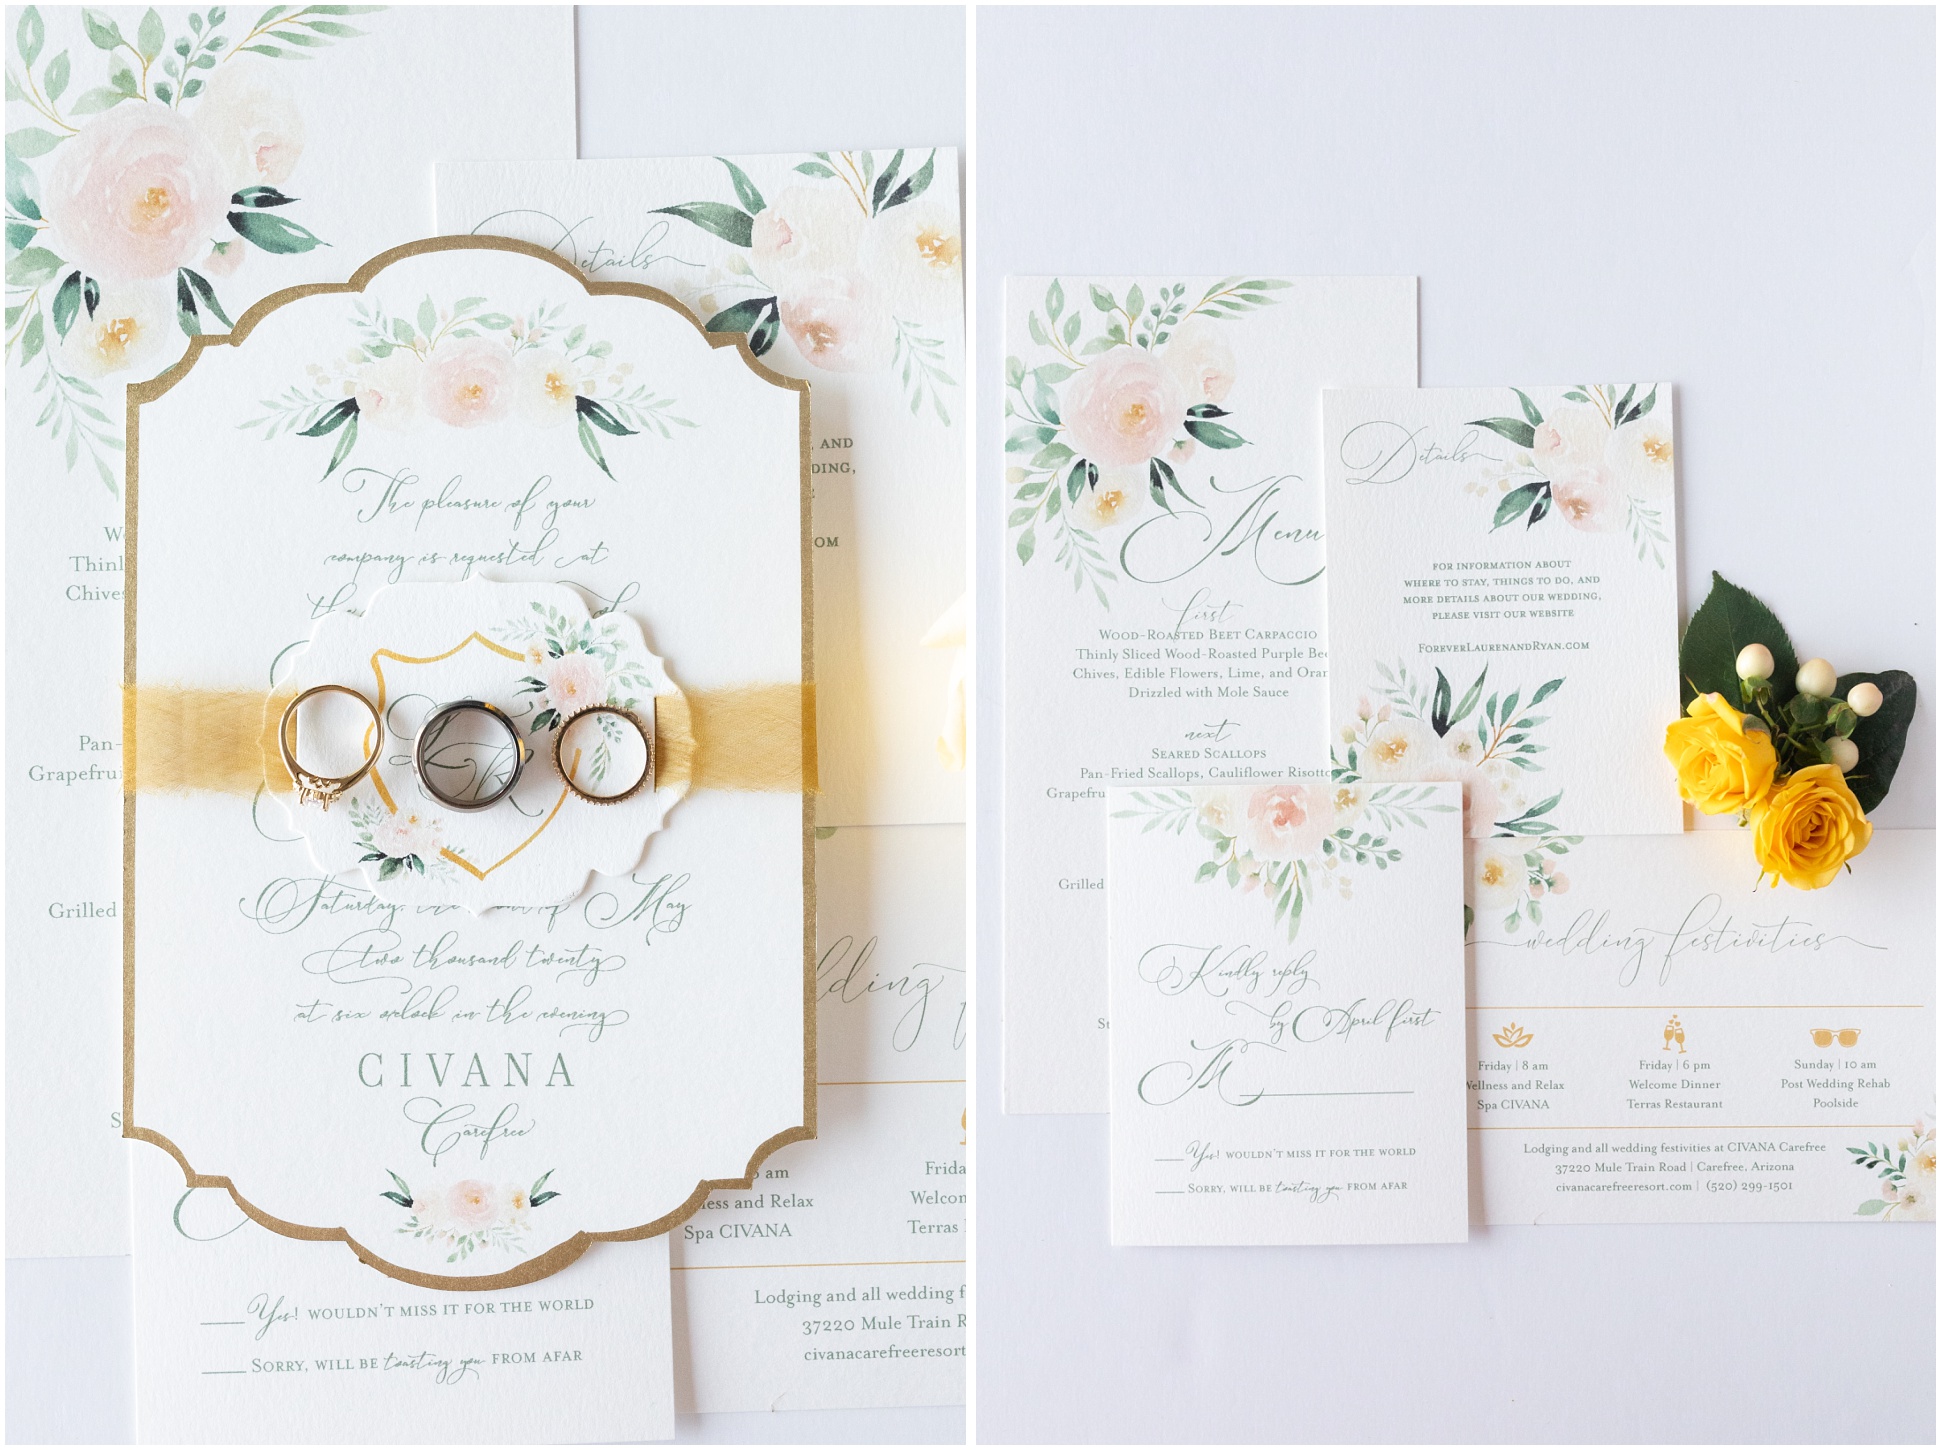 Two photos of a beautiful invitation suite created by Victoria York Design